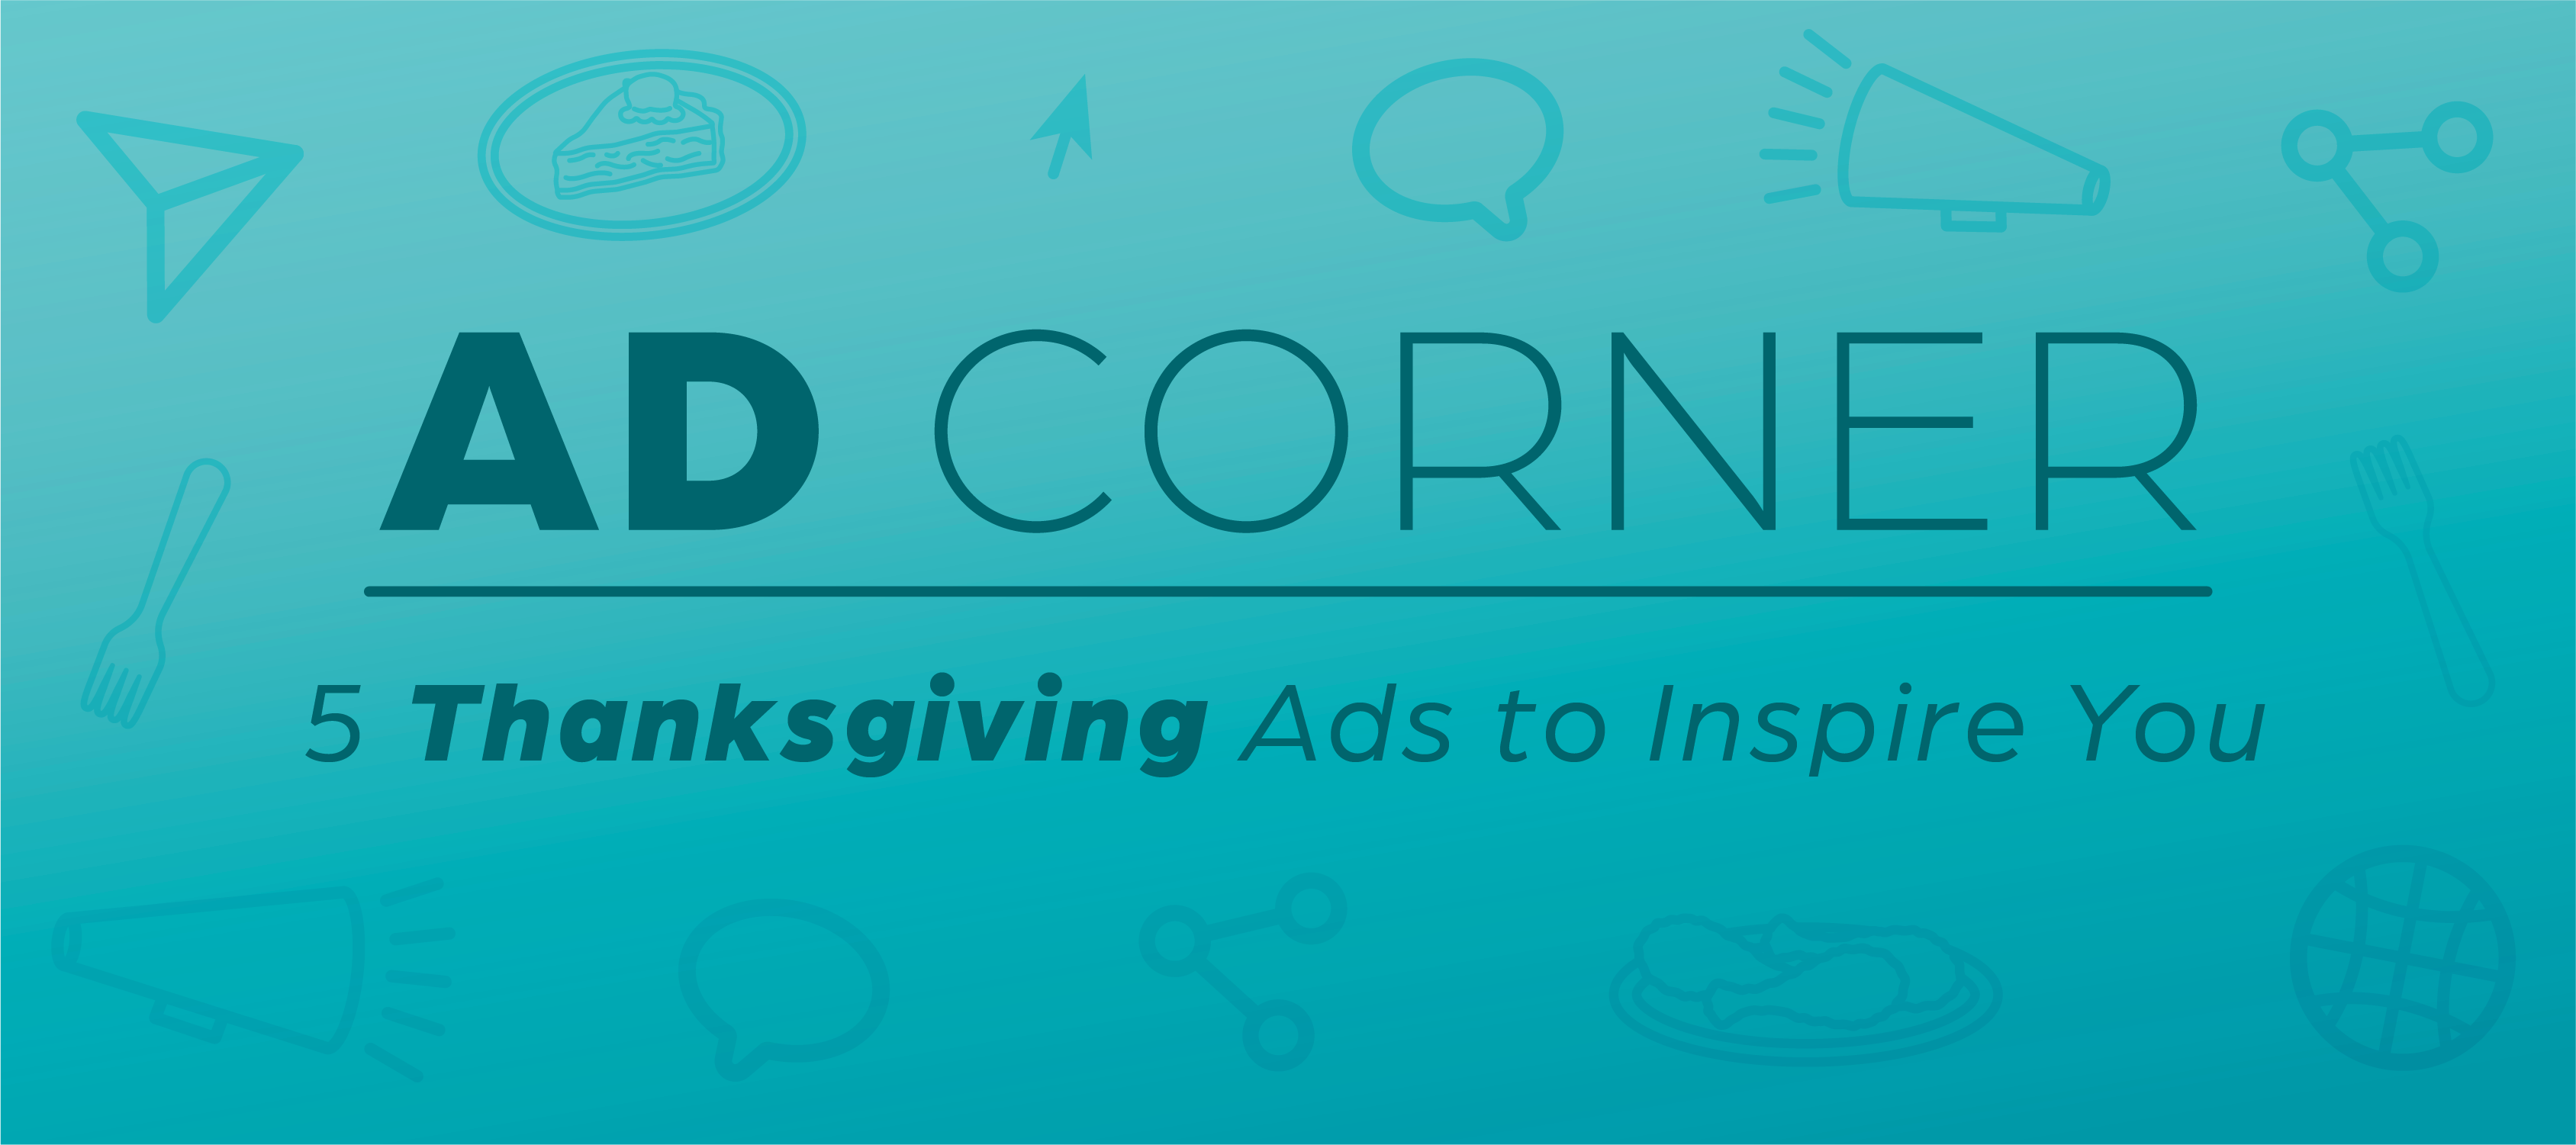 Header image that says "Ad Corner: 5 Thanksgiving Ads to Inspire You" surrounded by a mix of holiday and marketing icons